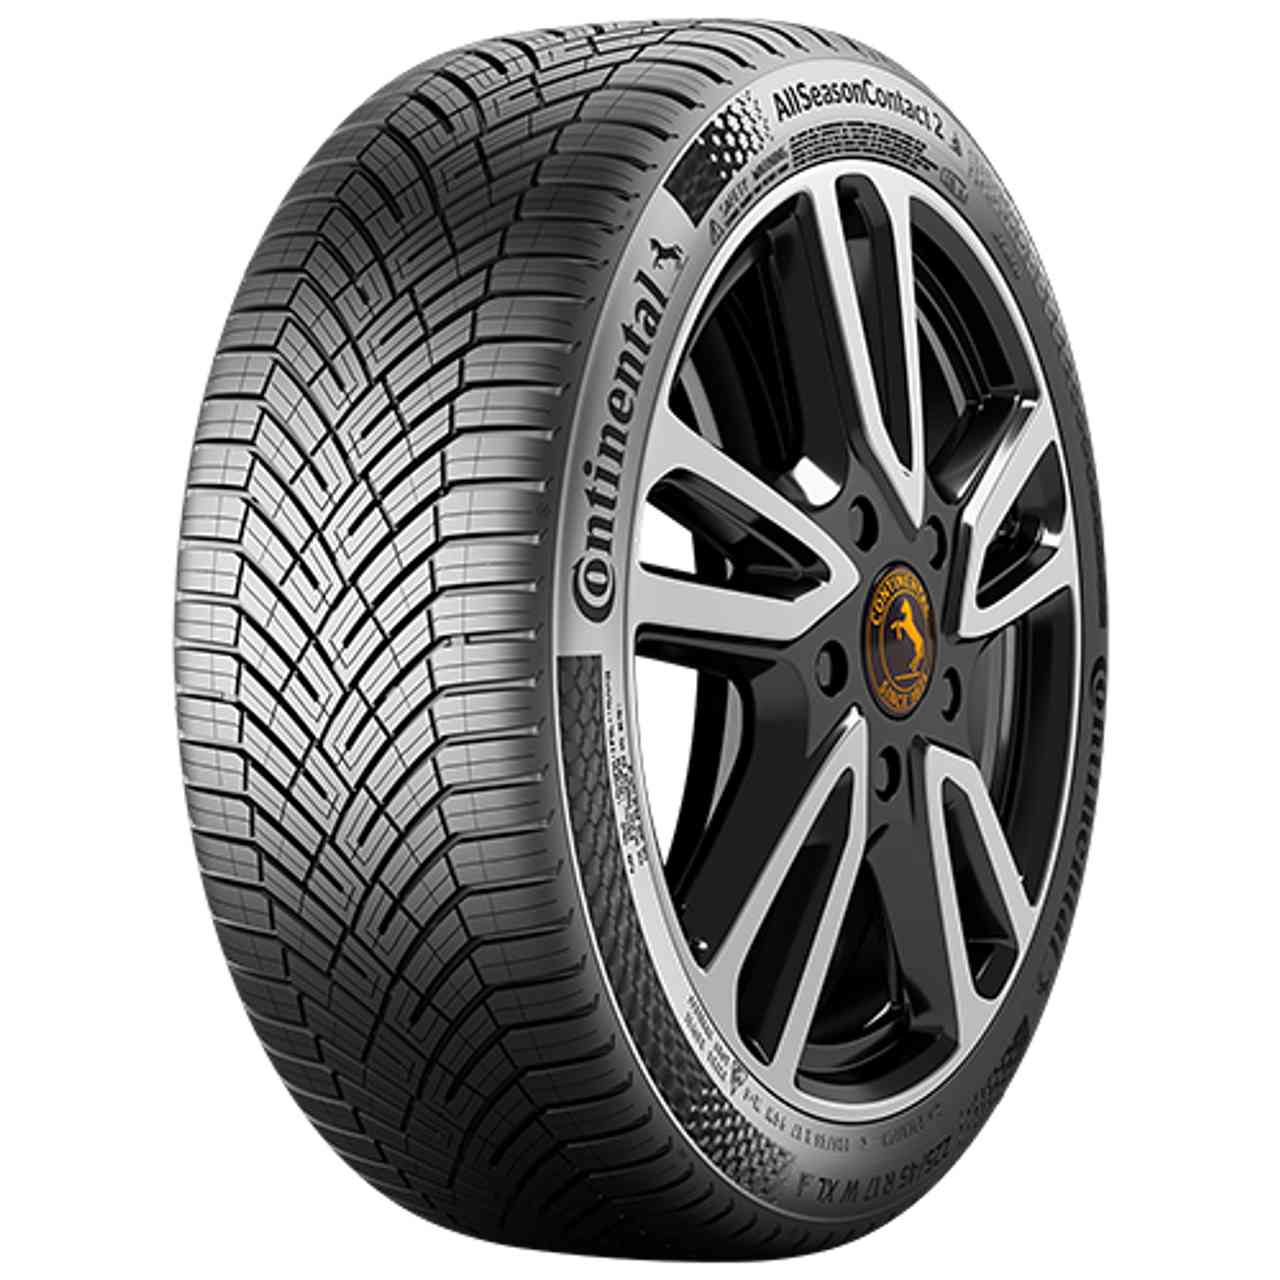 CONTINENTAL ALLSEASONCONTACT 2 (EVc) 175/60R18 85H BSW